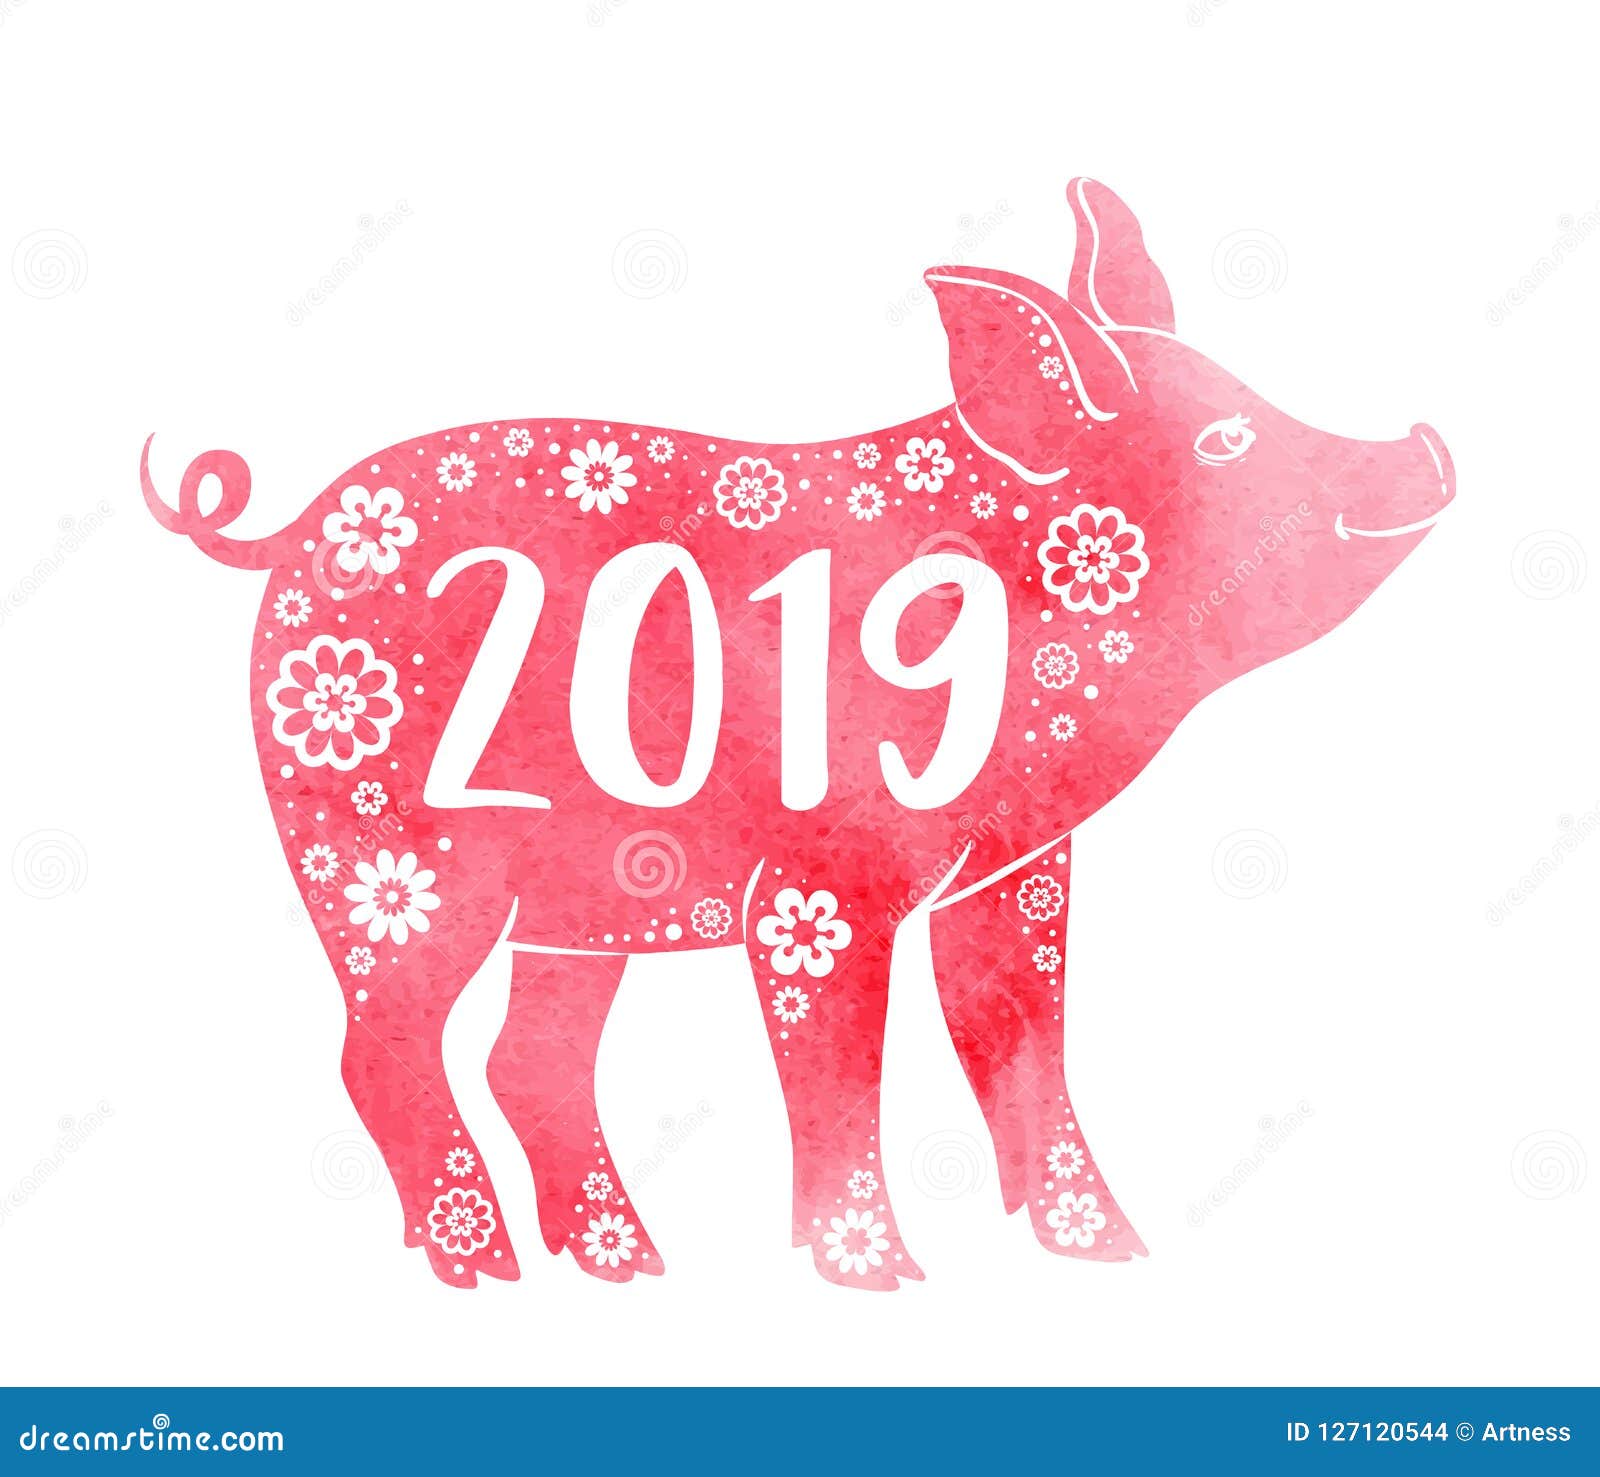 Download Pink Watercolor Silhouette Of Pig Stock Vector - Illustration of hand, silhouette: 127120544